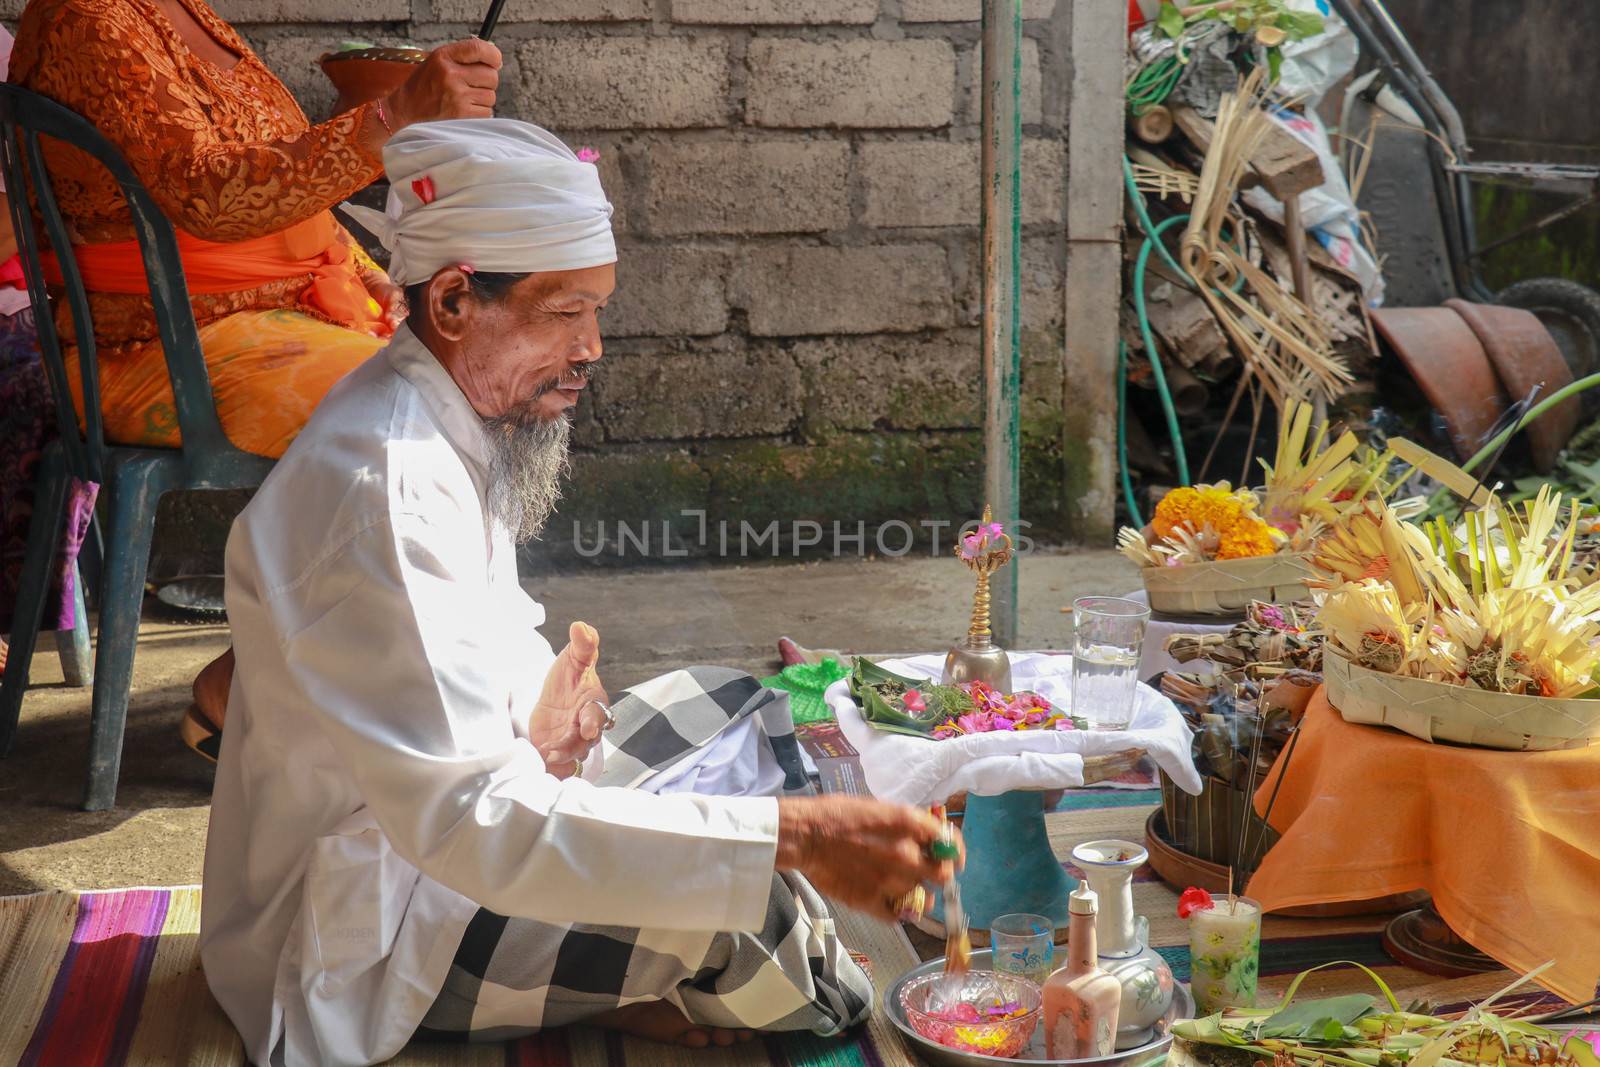 The Hindu Priest or widely known as Pedanda by the Balinese, blessing the ceremony of villas in Nuda dua,Bali.